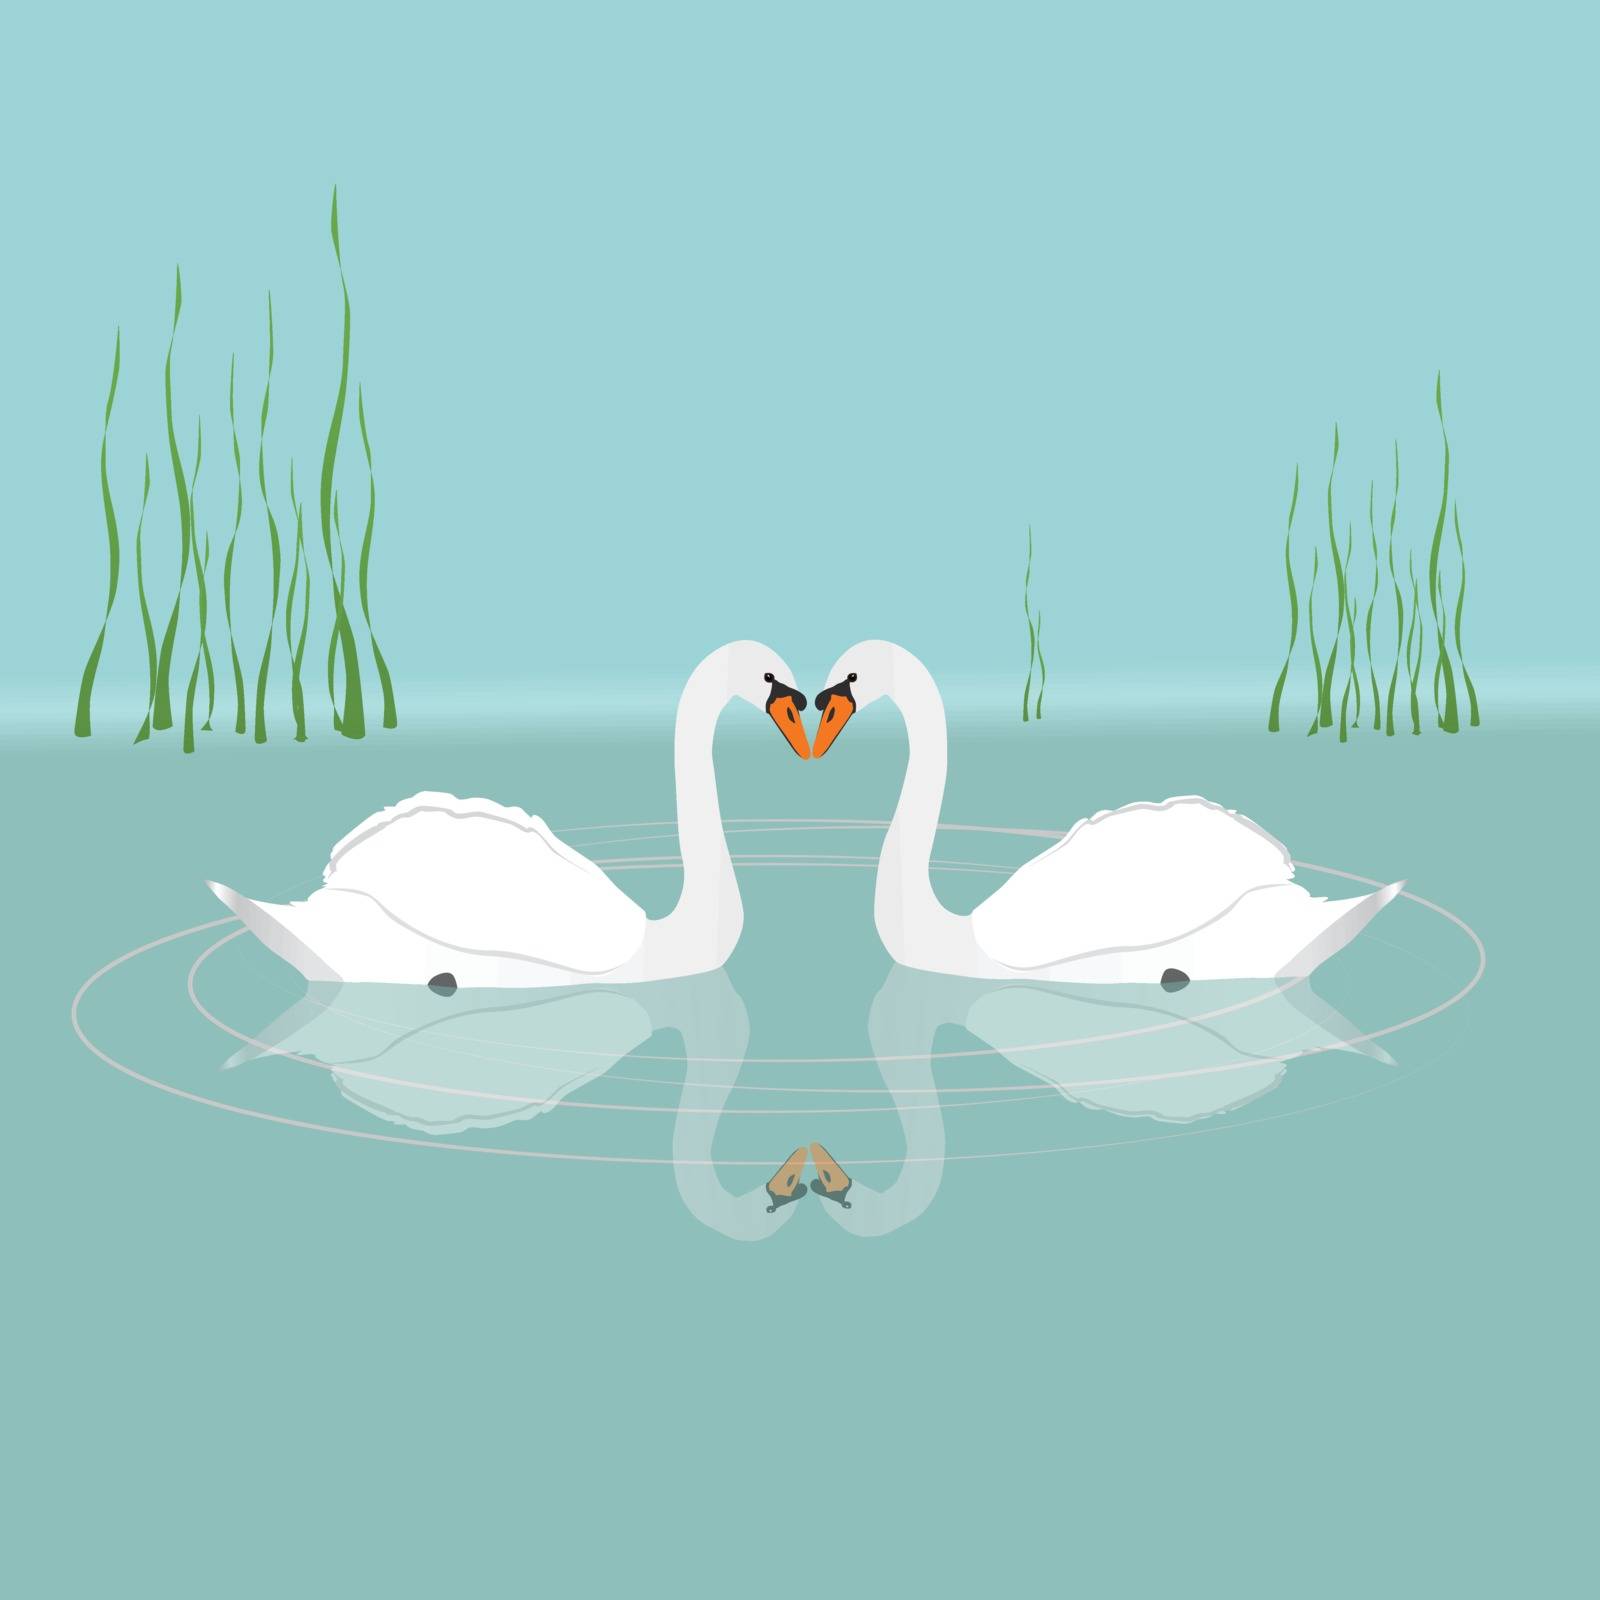 Two white swans by Bwise